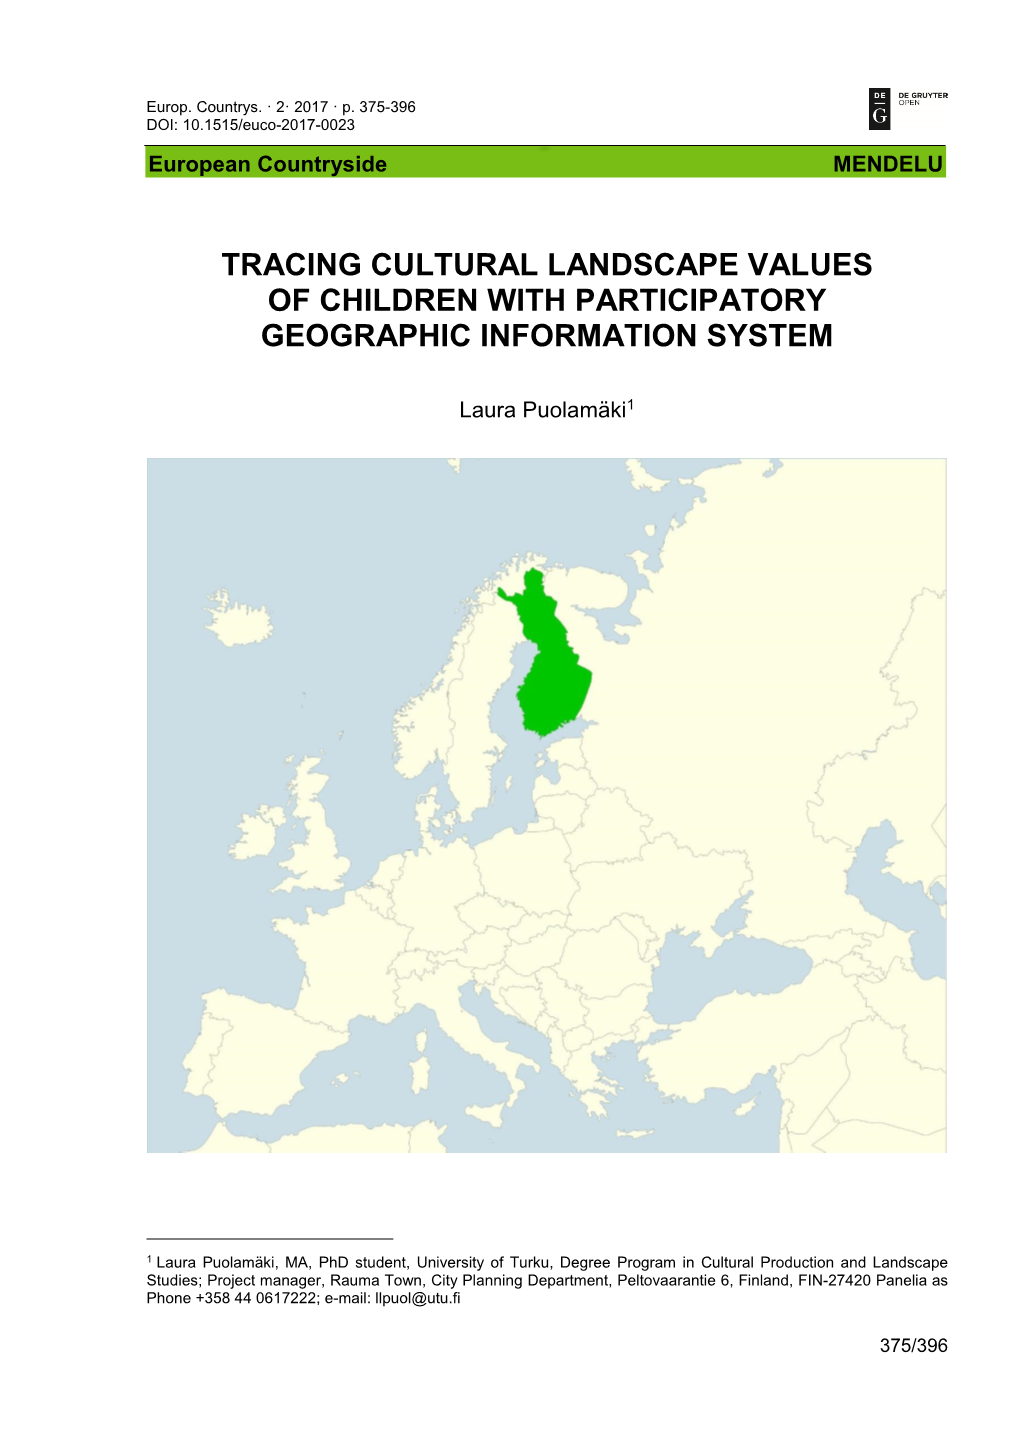 Tracing Cultural Landscape Values of Children with Participatory Geographic Information System